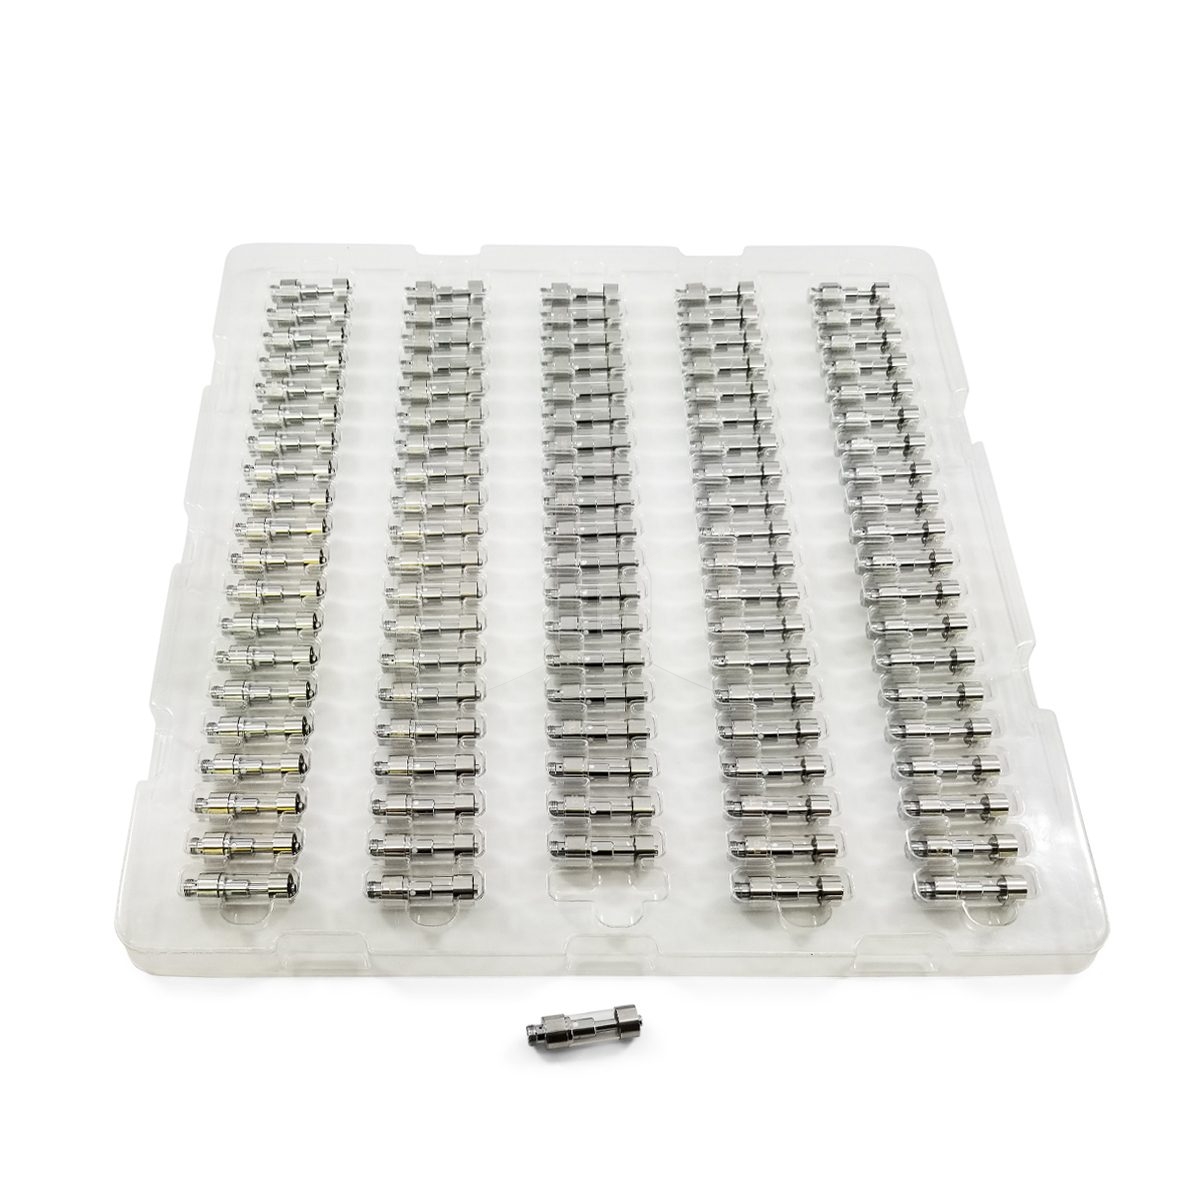 CCell Press On Cartridge Stainless Steel .5ML (100 pieces)